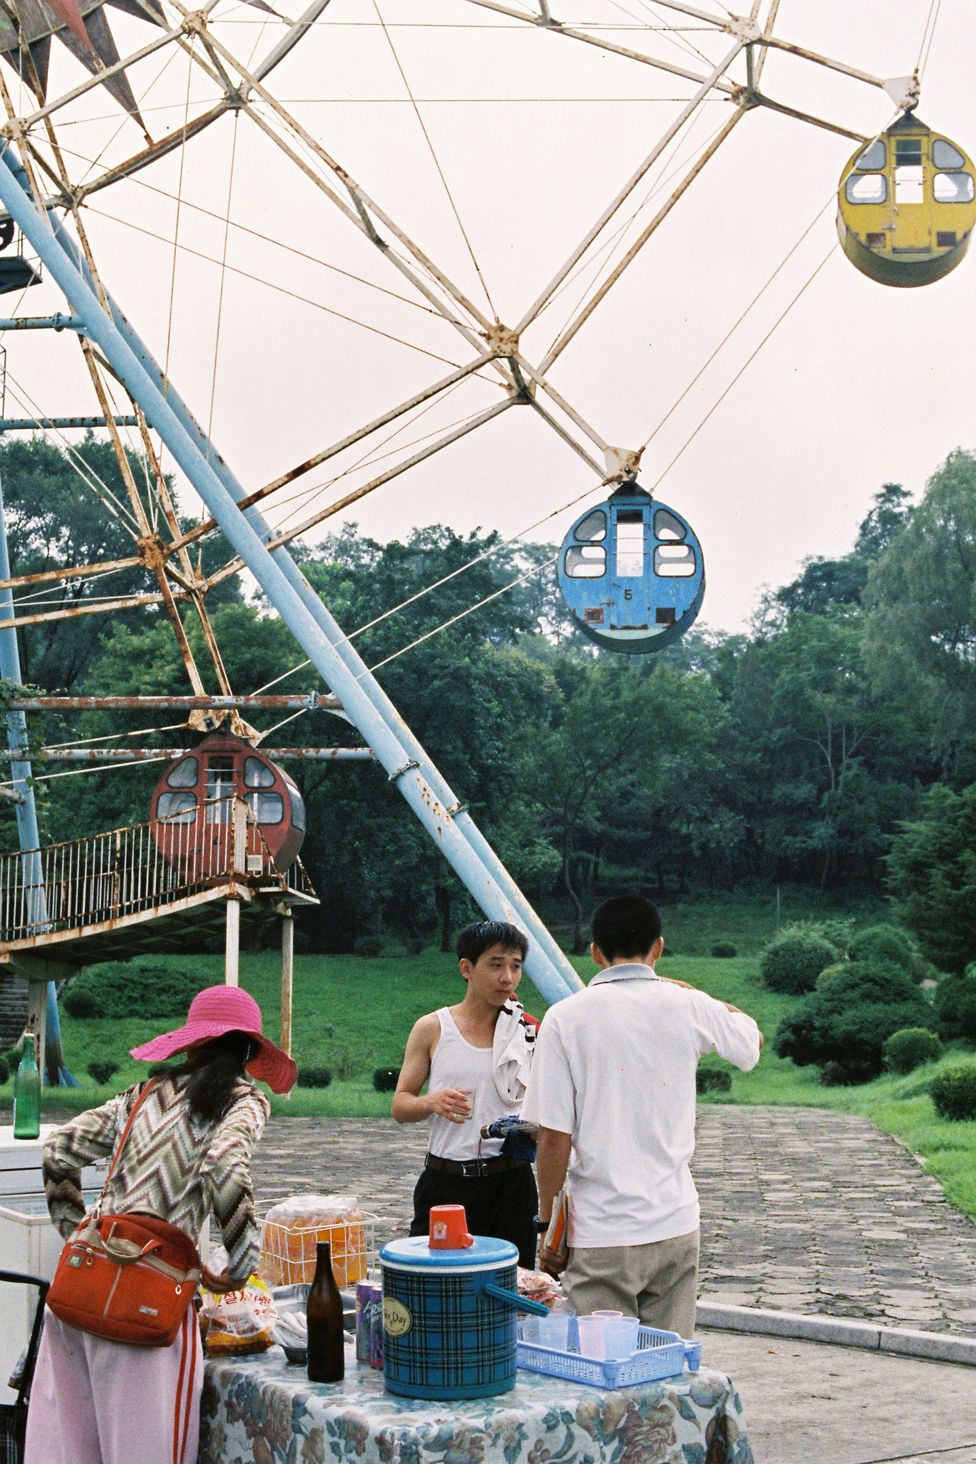 North Korea: Pyongyang, refreshment stand in front of the Ferris Wheel, in the amusement park in Pyongyang, 2009